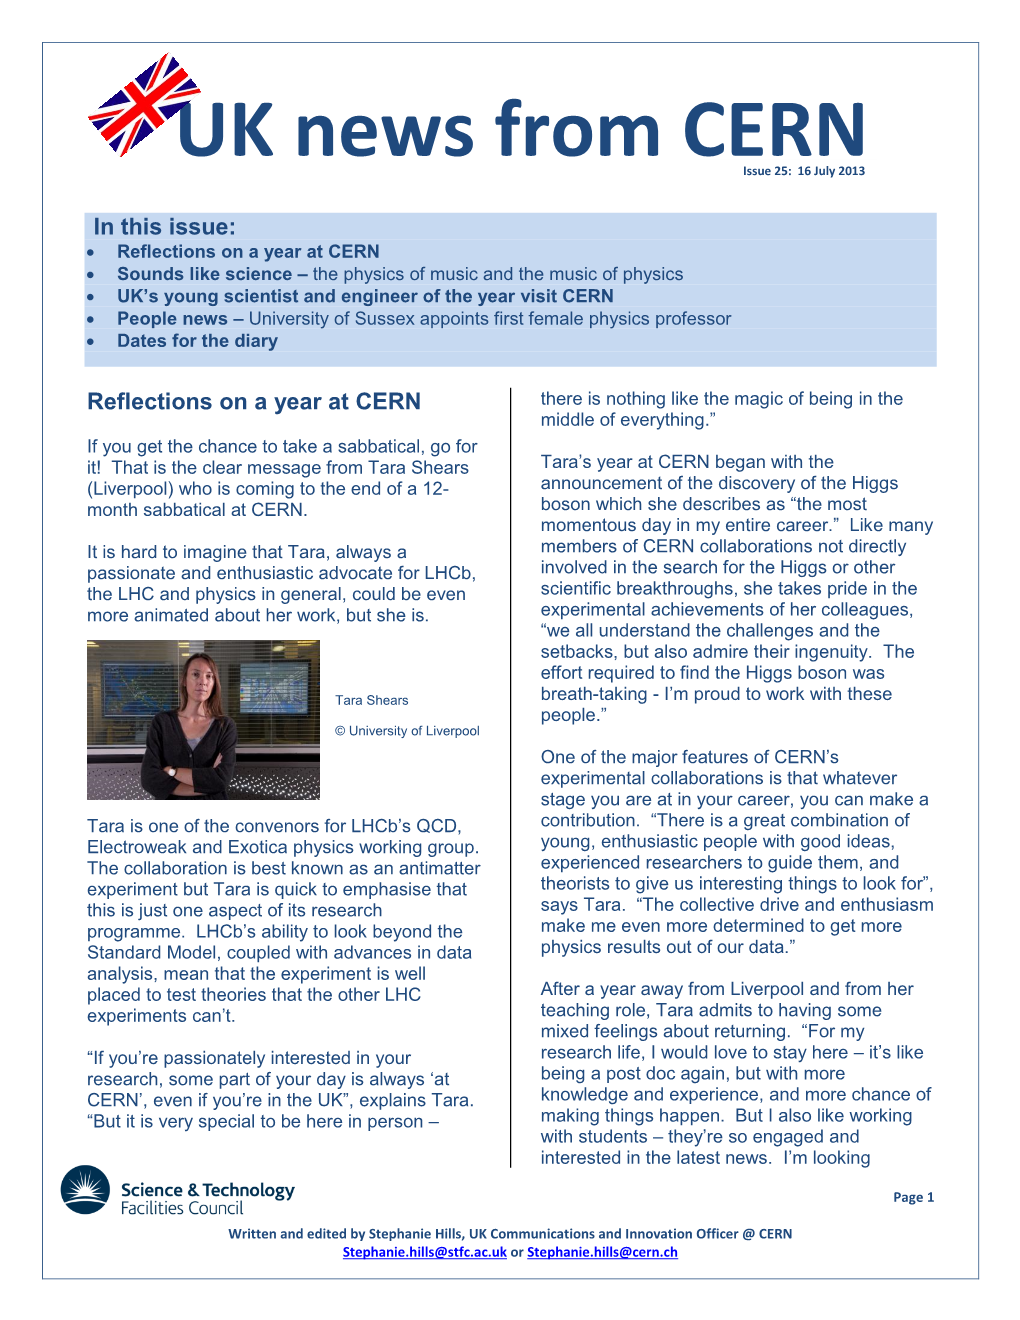 UK News from CERN Issue 25: 16 July 2013